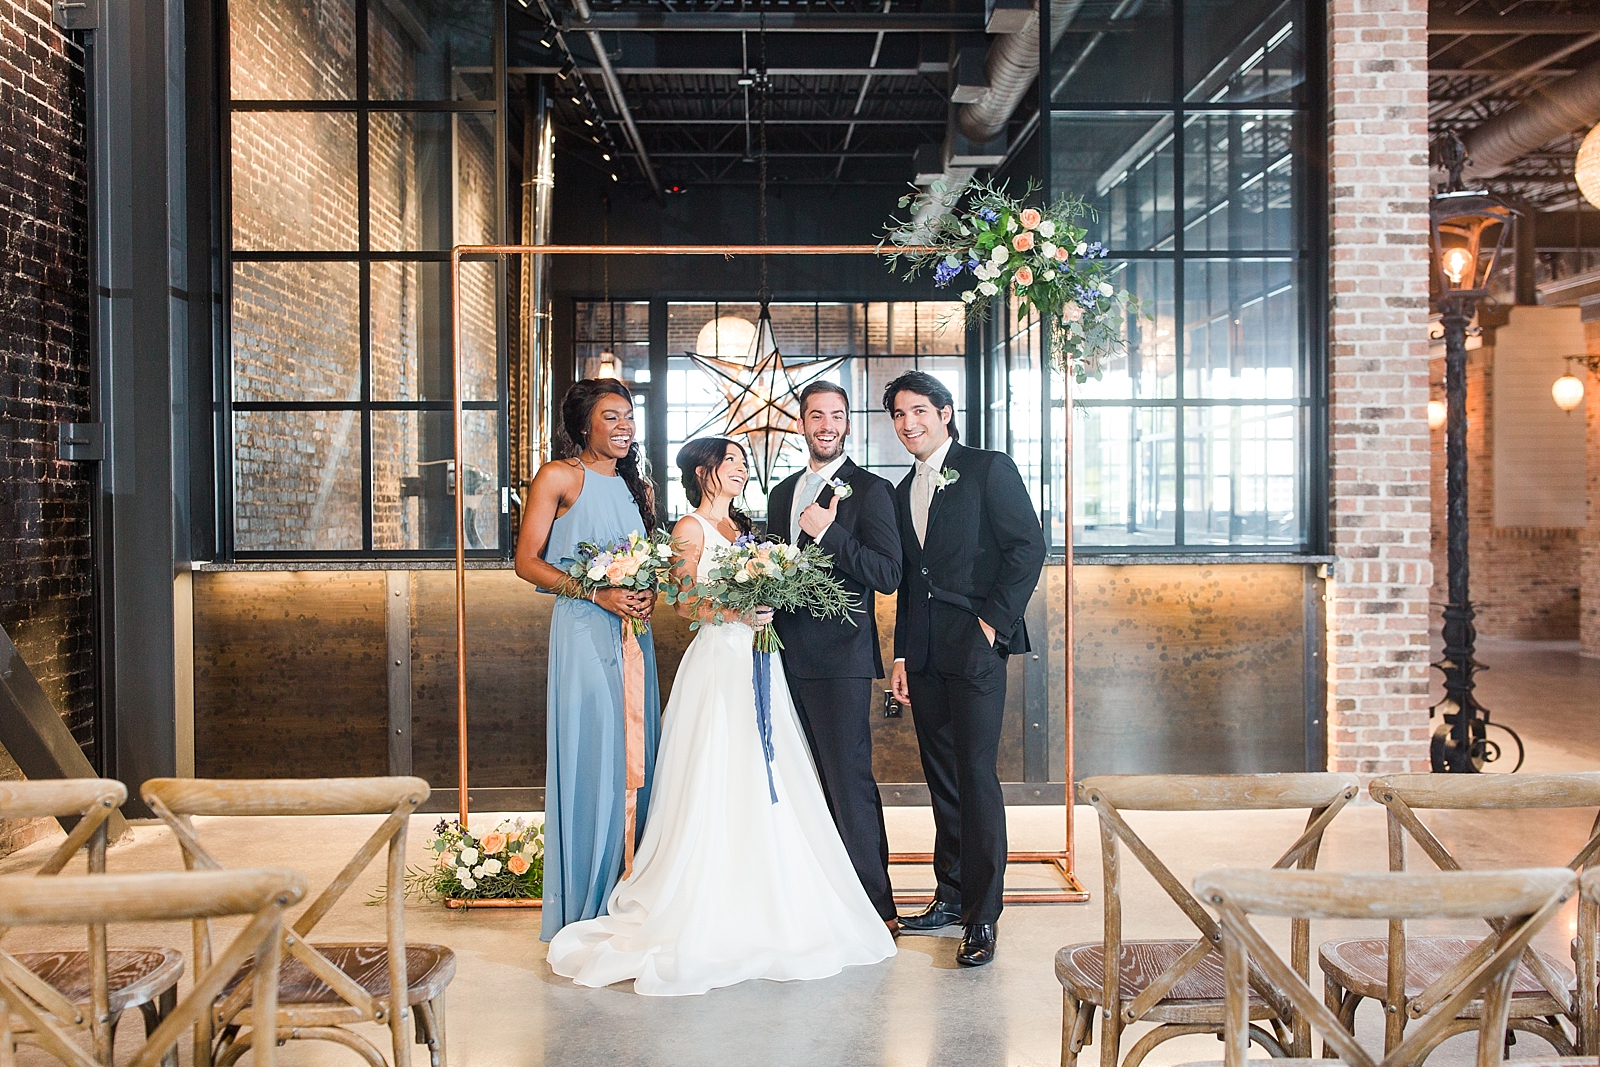 Glover Park Brewery Wedding Bridal Party Laughing in front of Copper Alter Photo